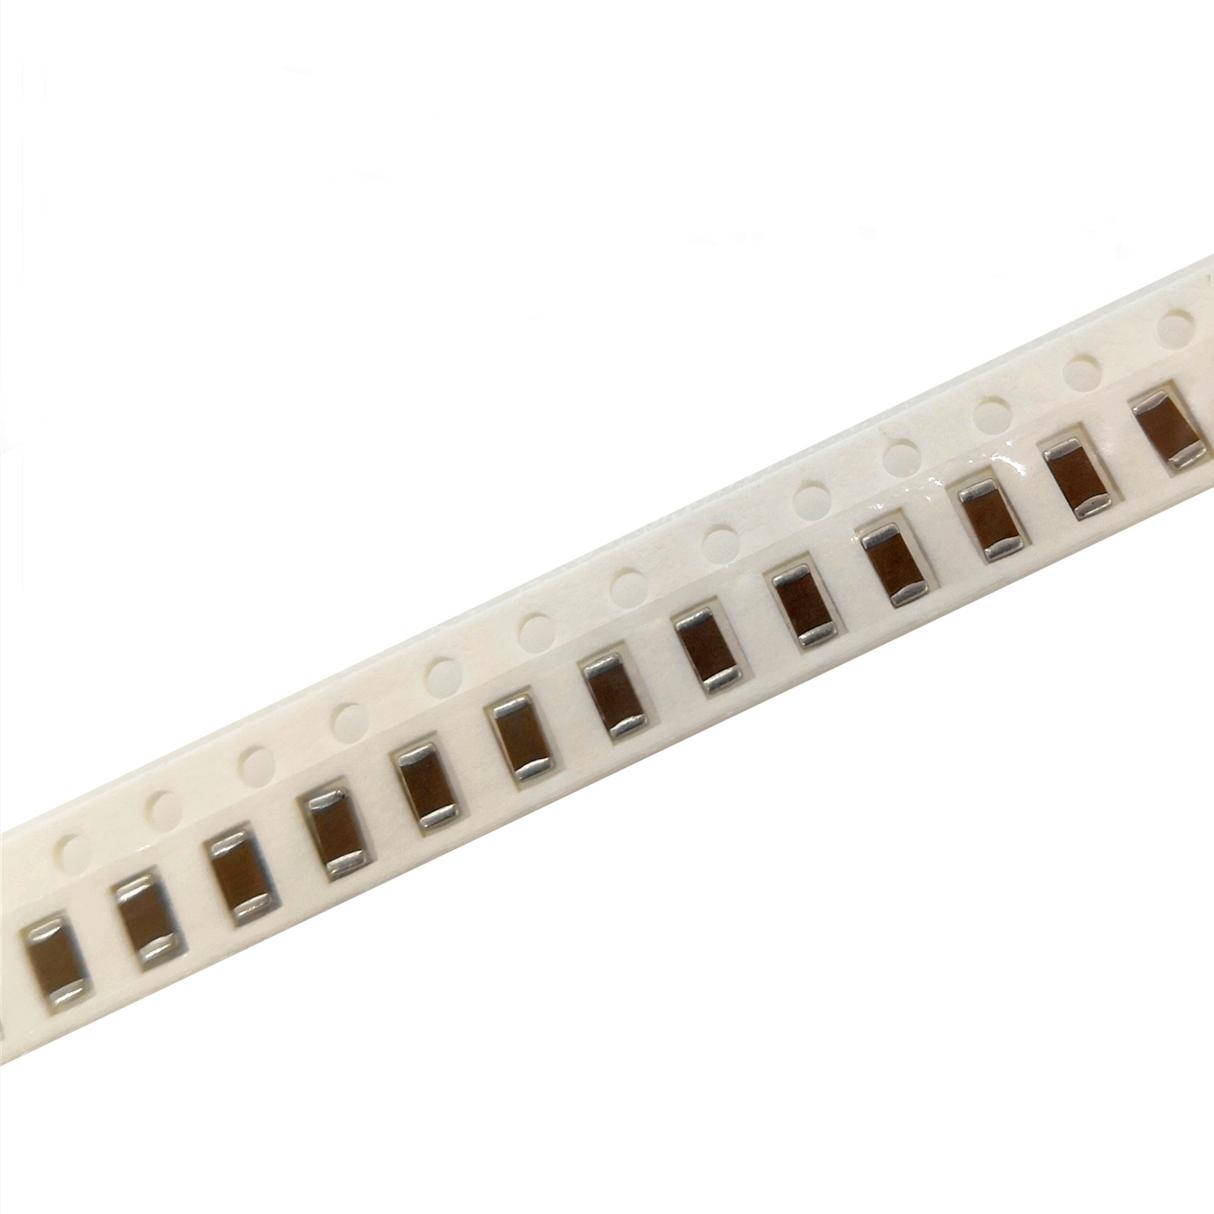  SMD 68pF 1206 C0G(NP0)